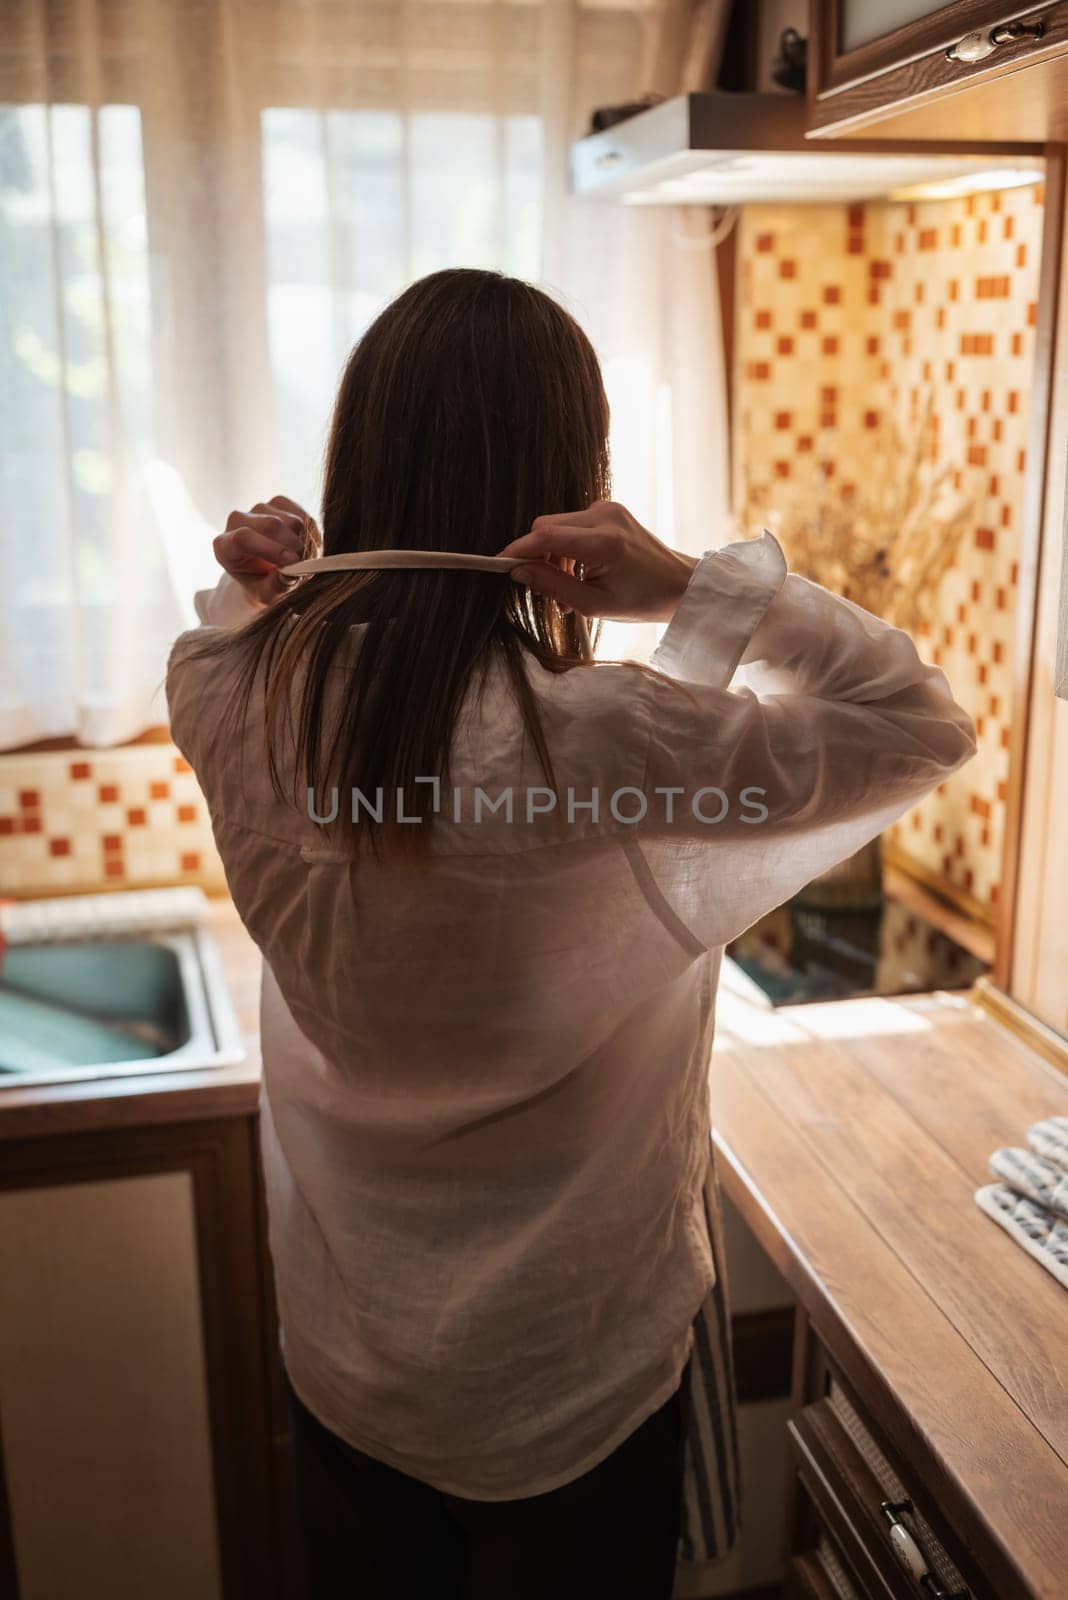 Girl standing in kitchen put on an apron by VitaliiPetrushenko